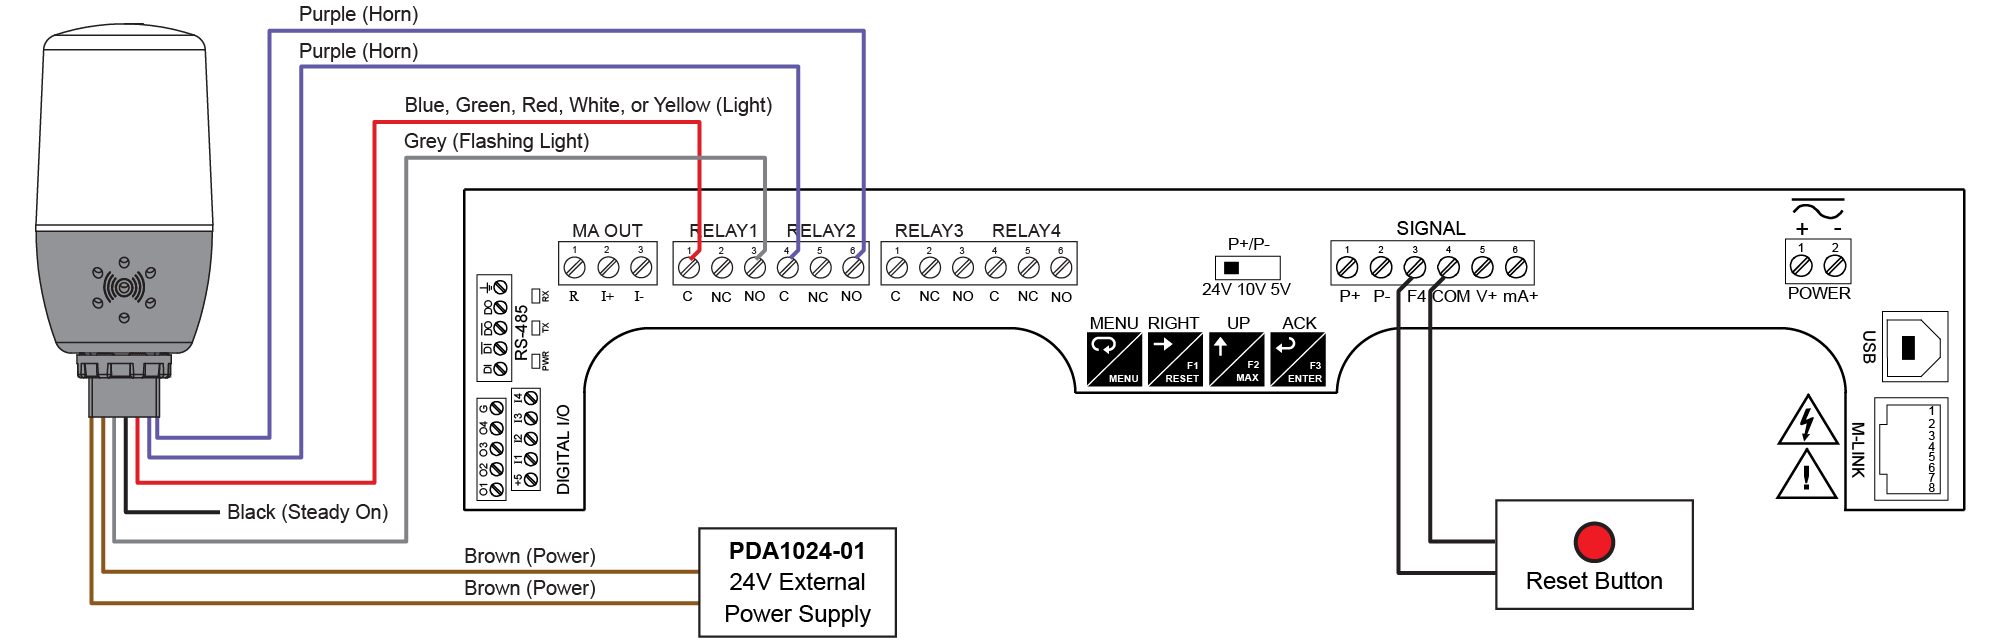 Wiring Connections for PDA-LH Models Using PDA1024-01 External Power Supply